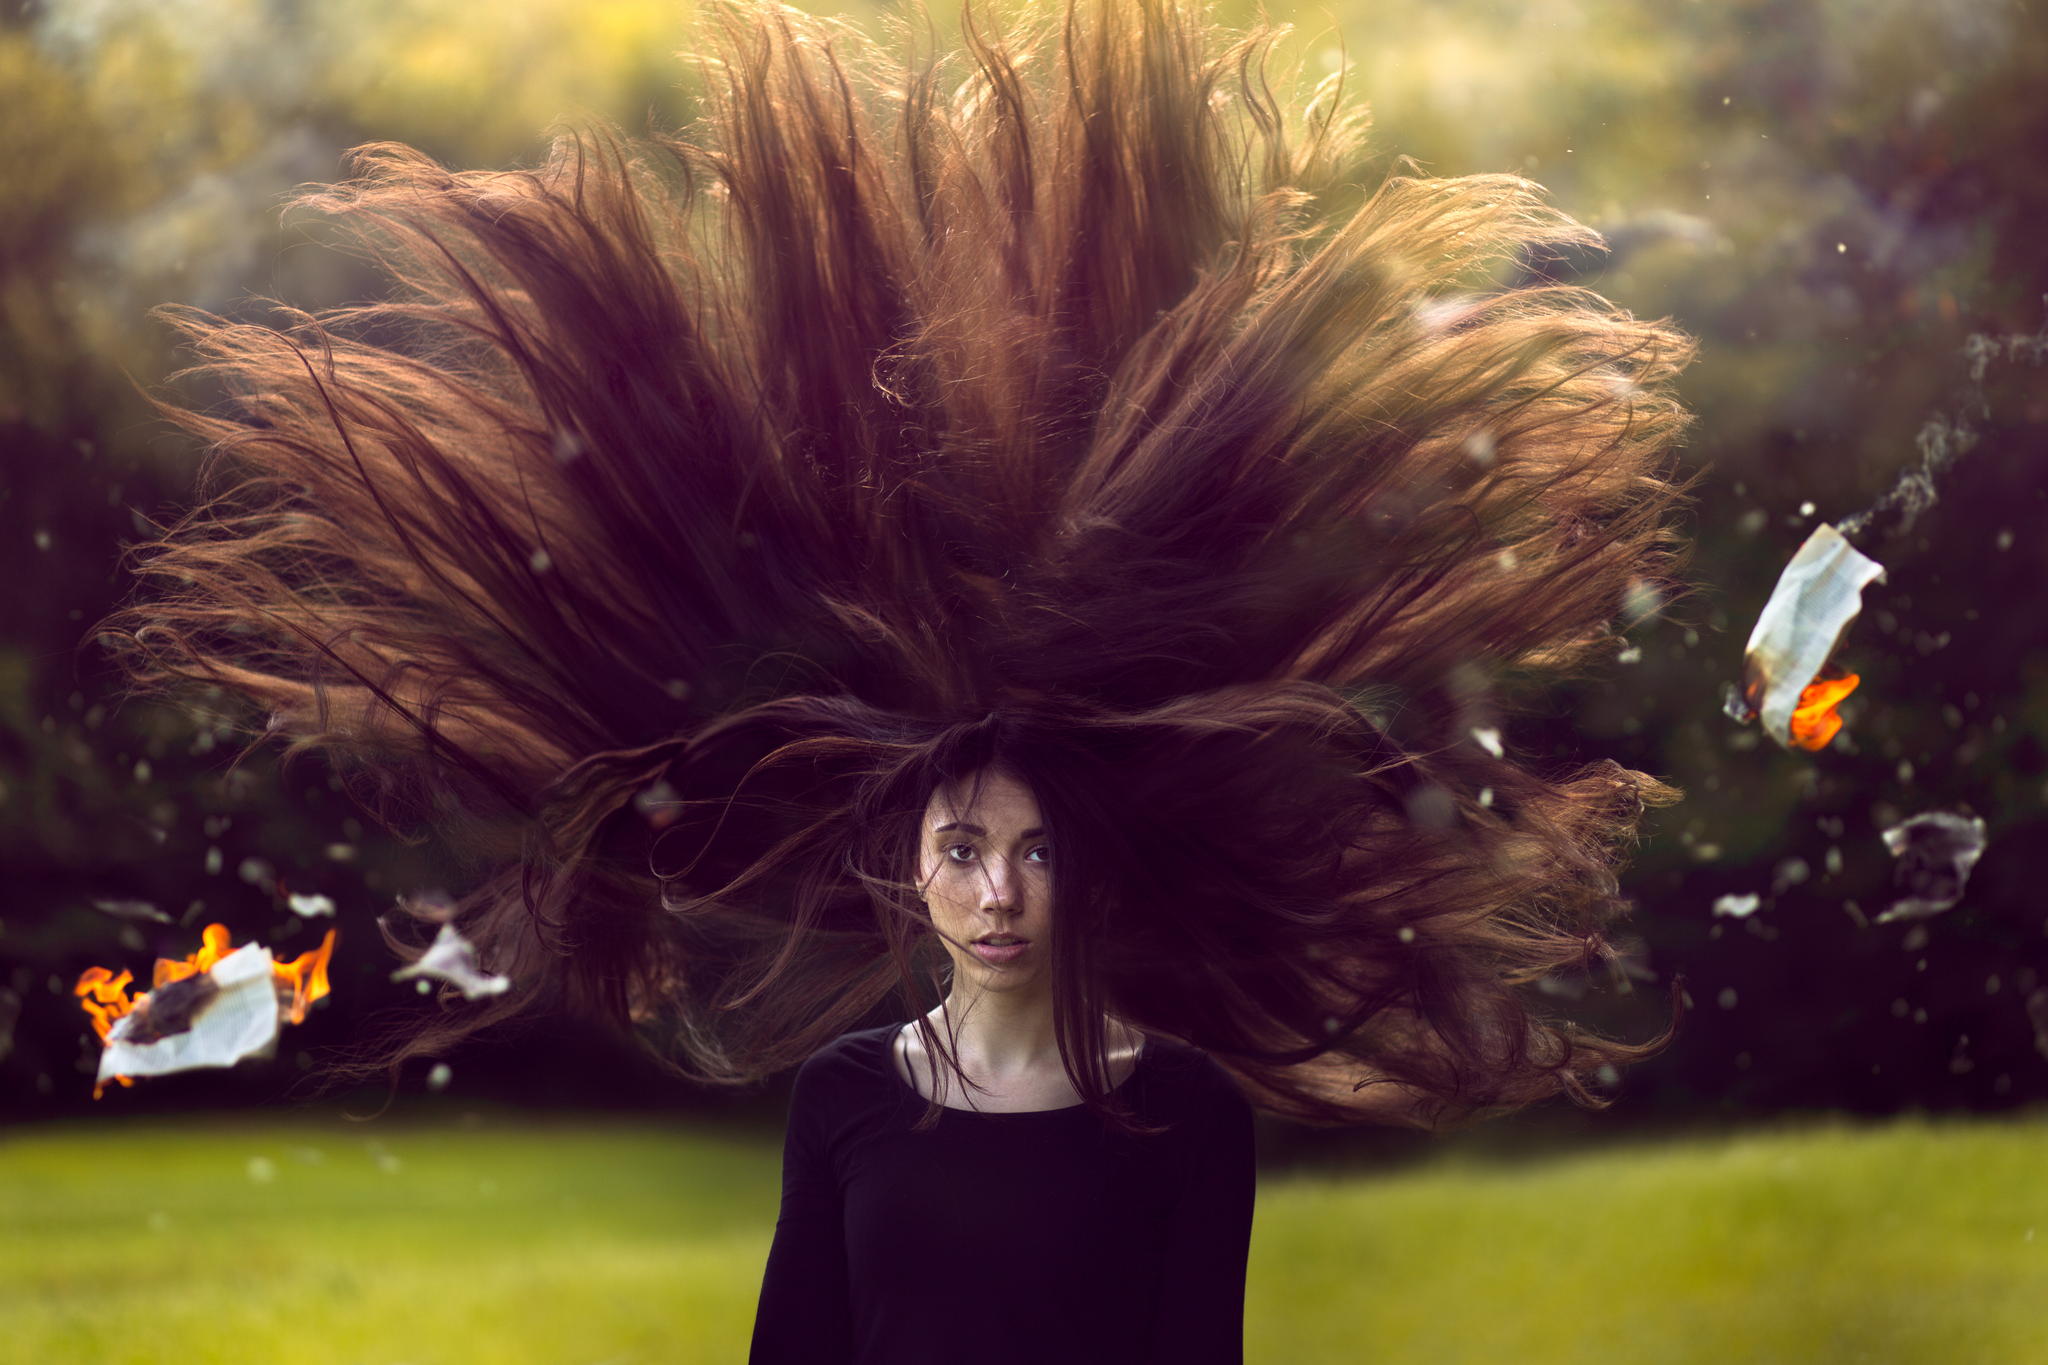 How To Create Big, Dramatic Hair In Photoshop